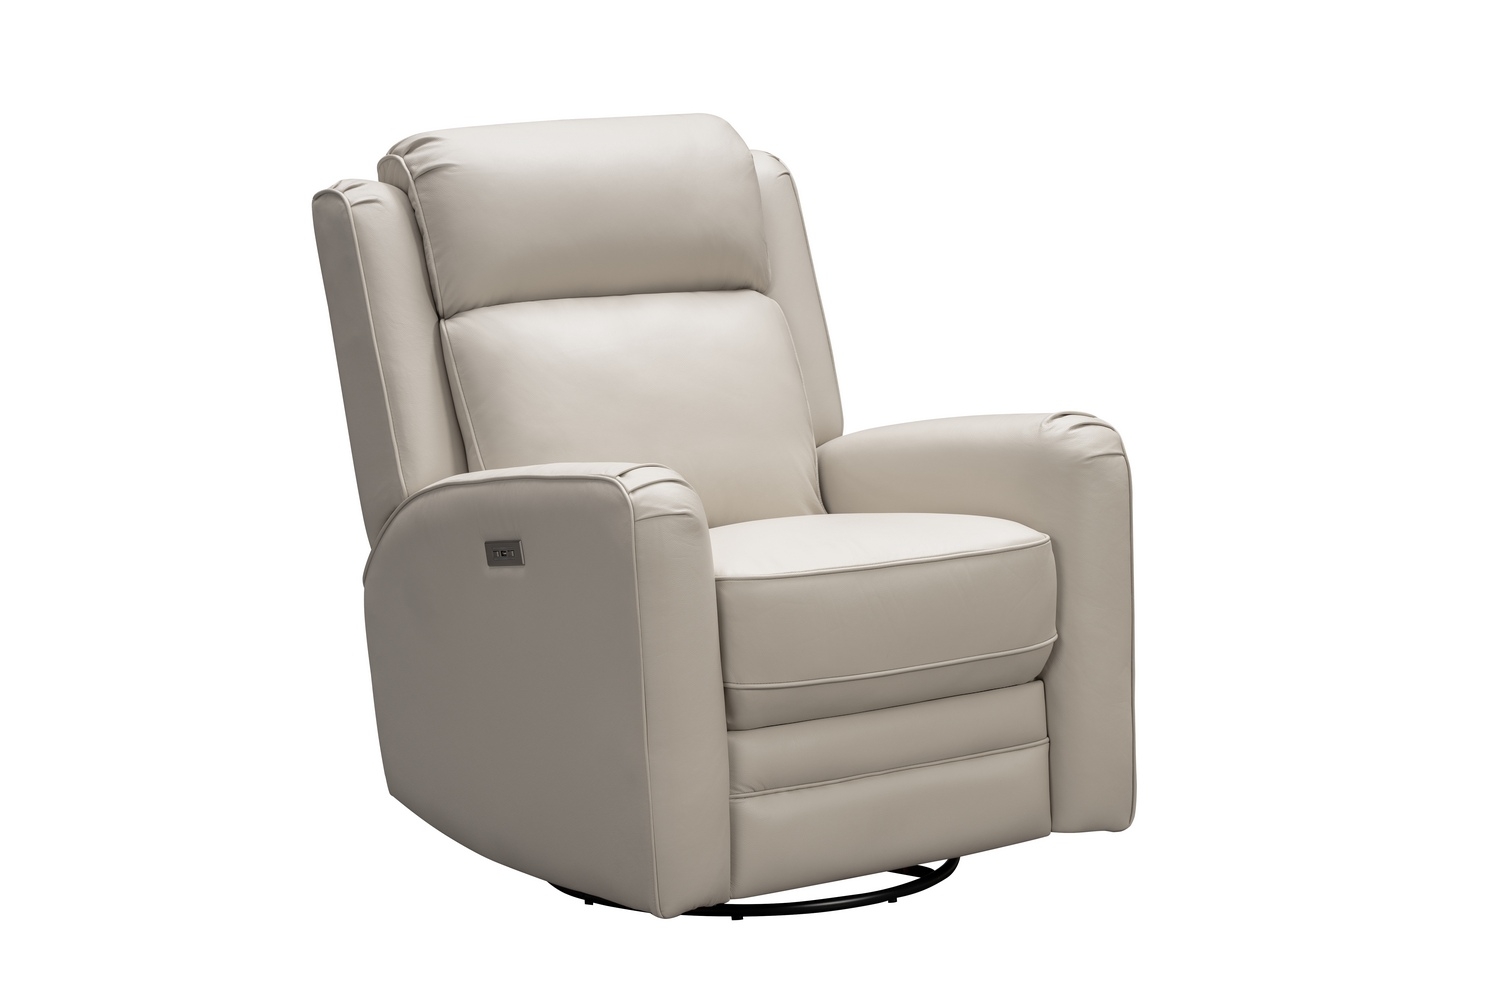 Barcalounger Kennedy Big and Tall Power Swivel Recliner Chair with Power Head Rest - Laurel Cream/Leather Match